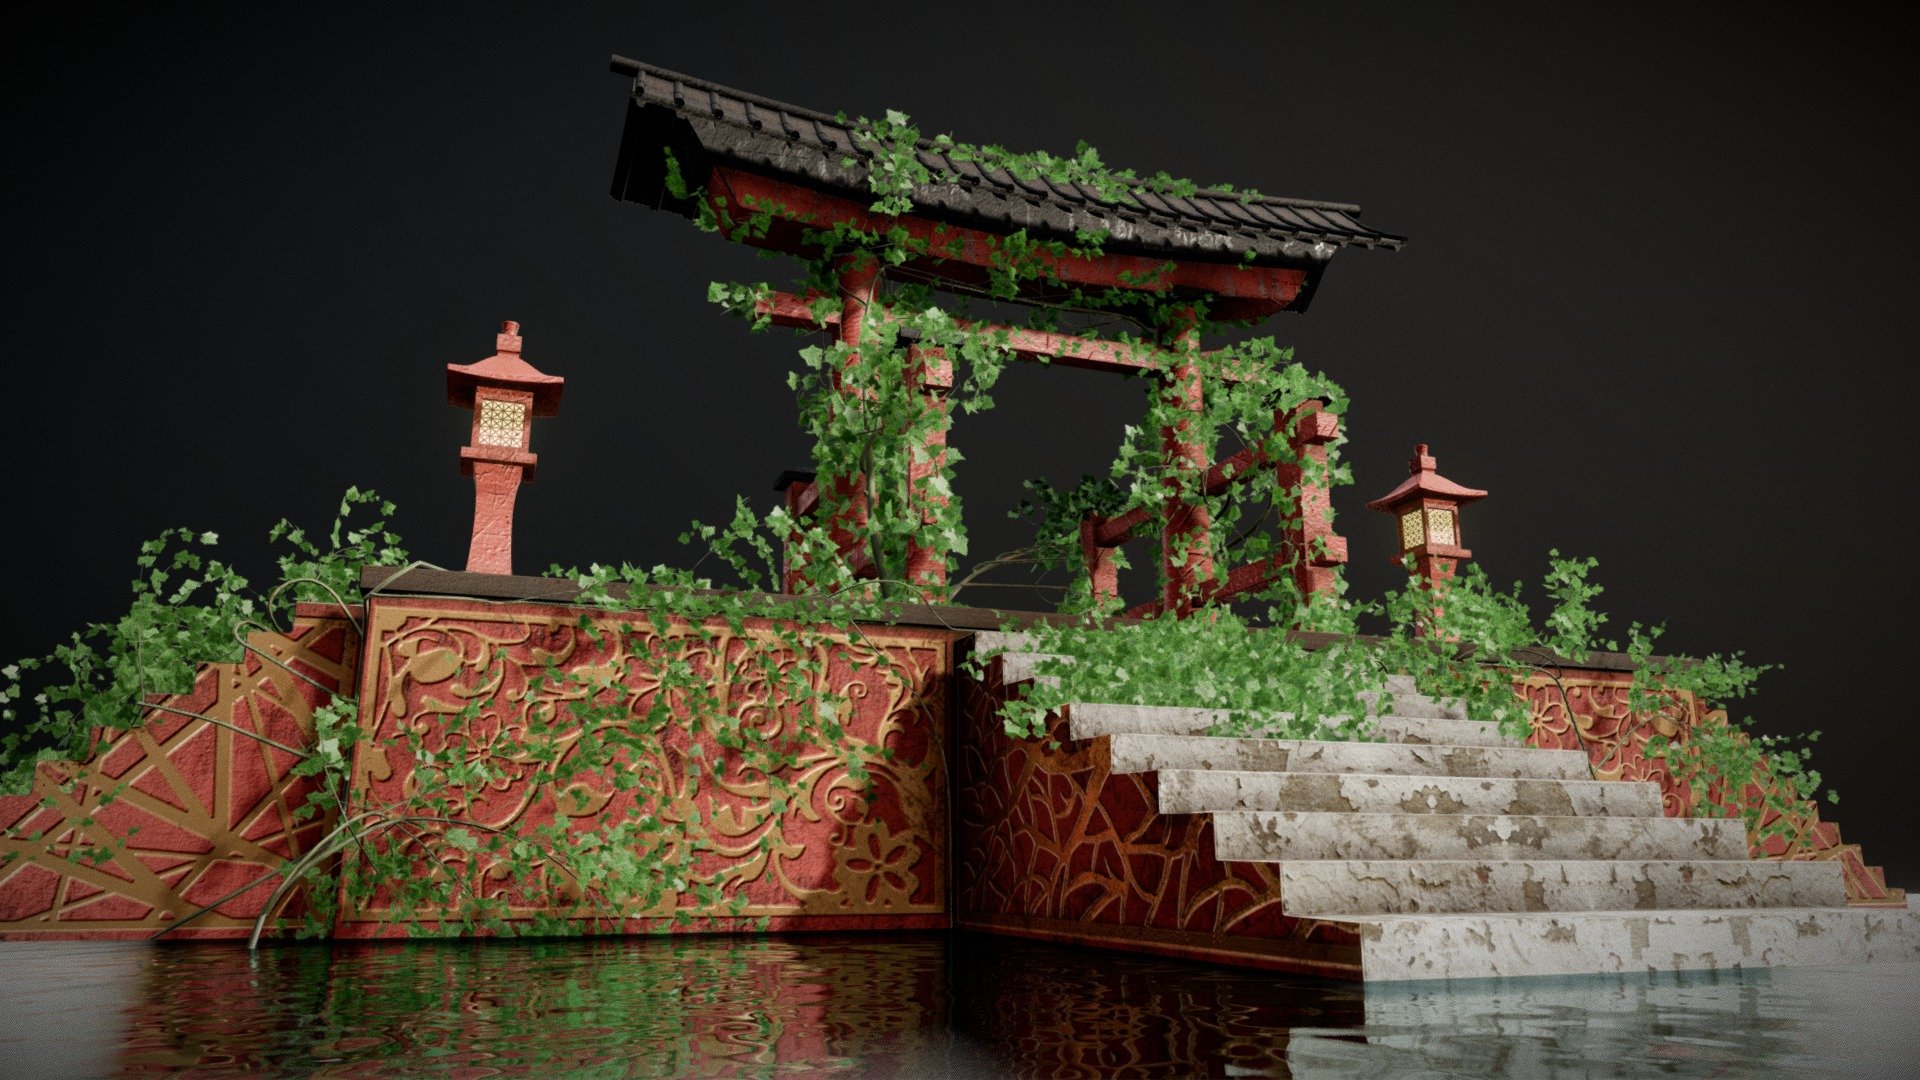 Torii Gate With Vines with 2k and 4k Textures.All the required Texture files are contained in Additiional Files.You Can Totally Remove the ivy/Vines by Removing the Branch and leaves Meshes from the Parent in Blend File.All the Meshes are organized in blend file.
Thank You!

Buy Full Pack https://sketchfab.com/3d-models/pagoda-structure-scene-abe6b579971742b6a35465e21951d616 - Torii Gate With Vines/Ivy - Buy Royalty Free 3D model by Nicholas-3D (@Nicholas01) 3d model